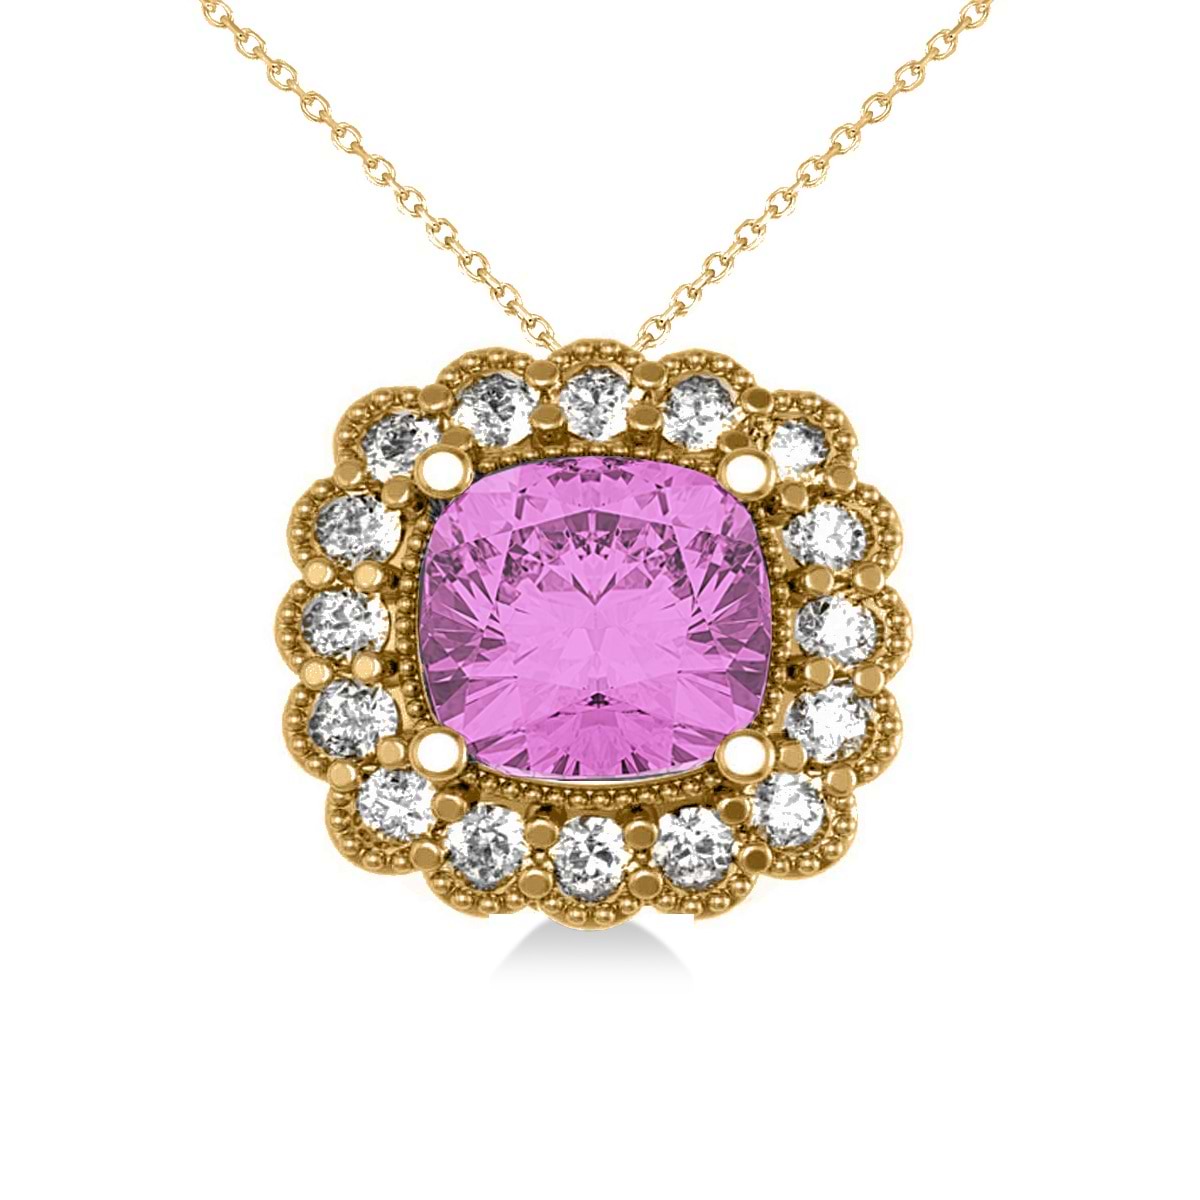 Pink Sapphire & Diamond Floral Cushion Pendant Necklace 14k Yellow Gold (3.16ct)